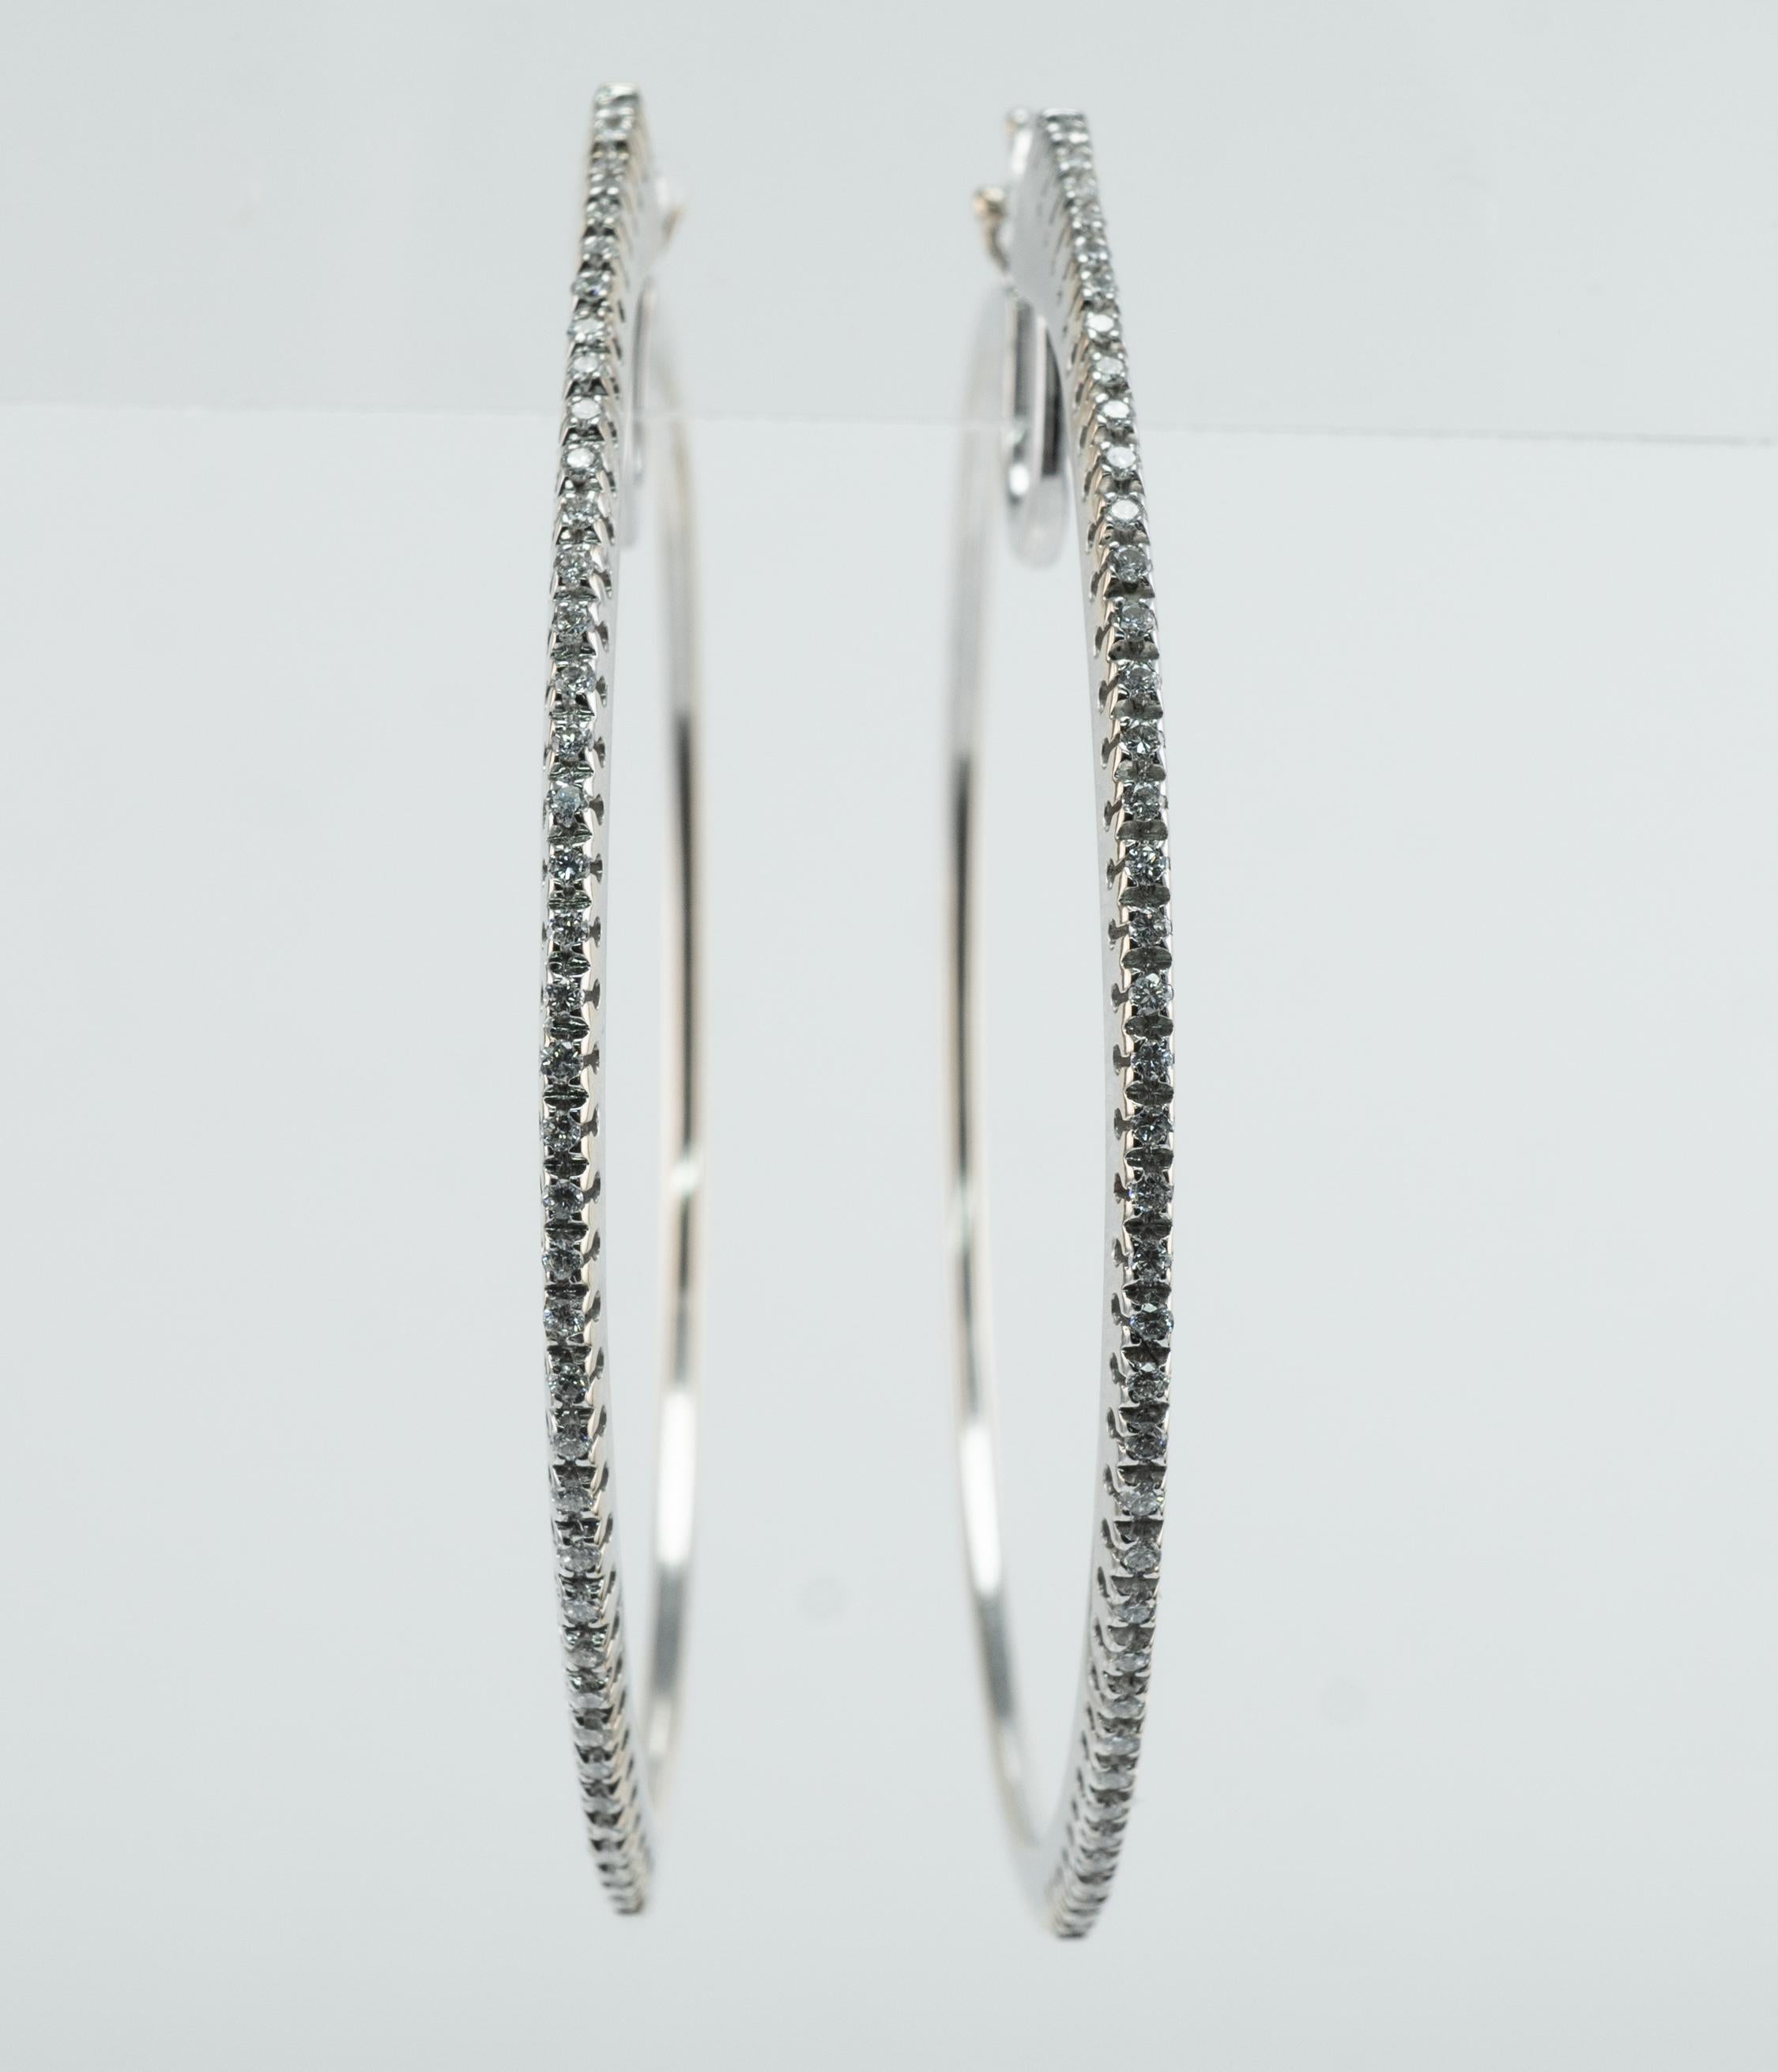 Diamond Hoop Earrings 18K White Gold by Diadema

This beautiful estate pair of earrings if finely crafted in solid 18K White gold by Italian jewelry company Diadema. There are 40 white and clean diamonds in each earring. The total diamond weight is